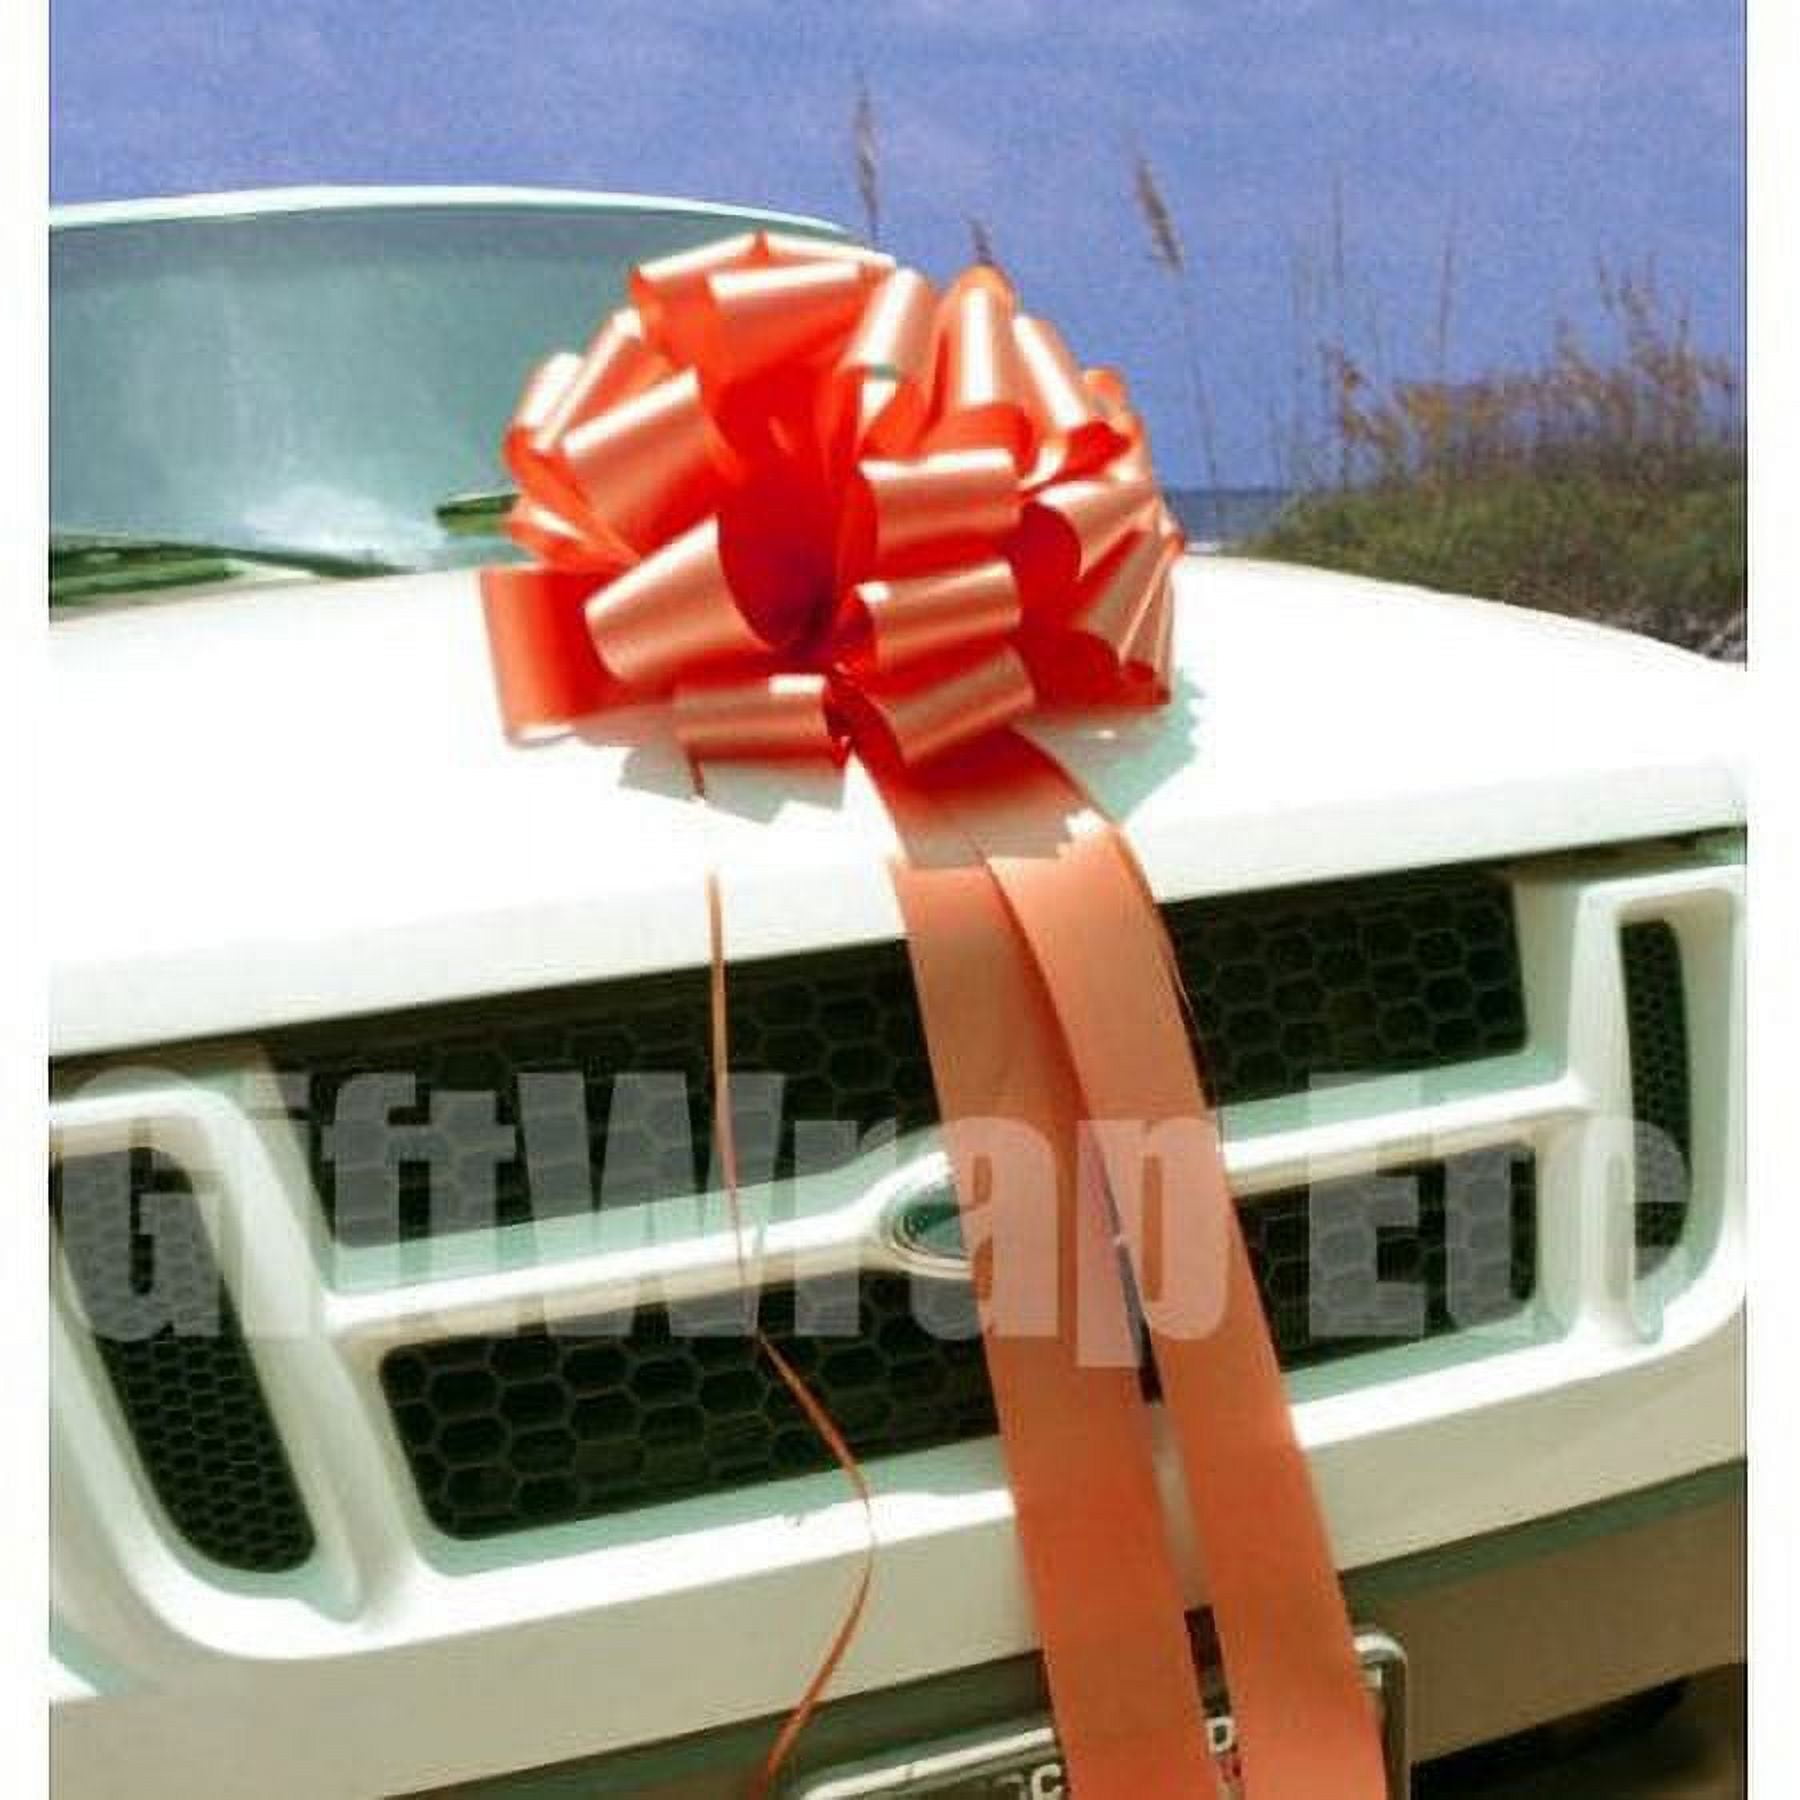 Large White Car Bow, 16 Wide - Front Door Decor, Christmas